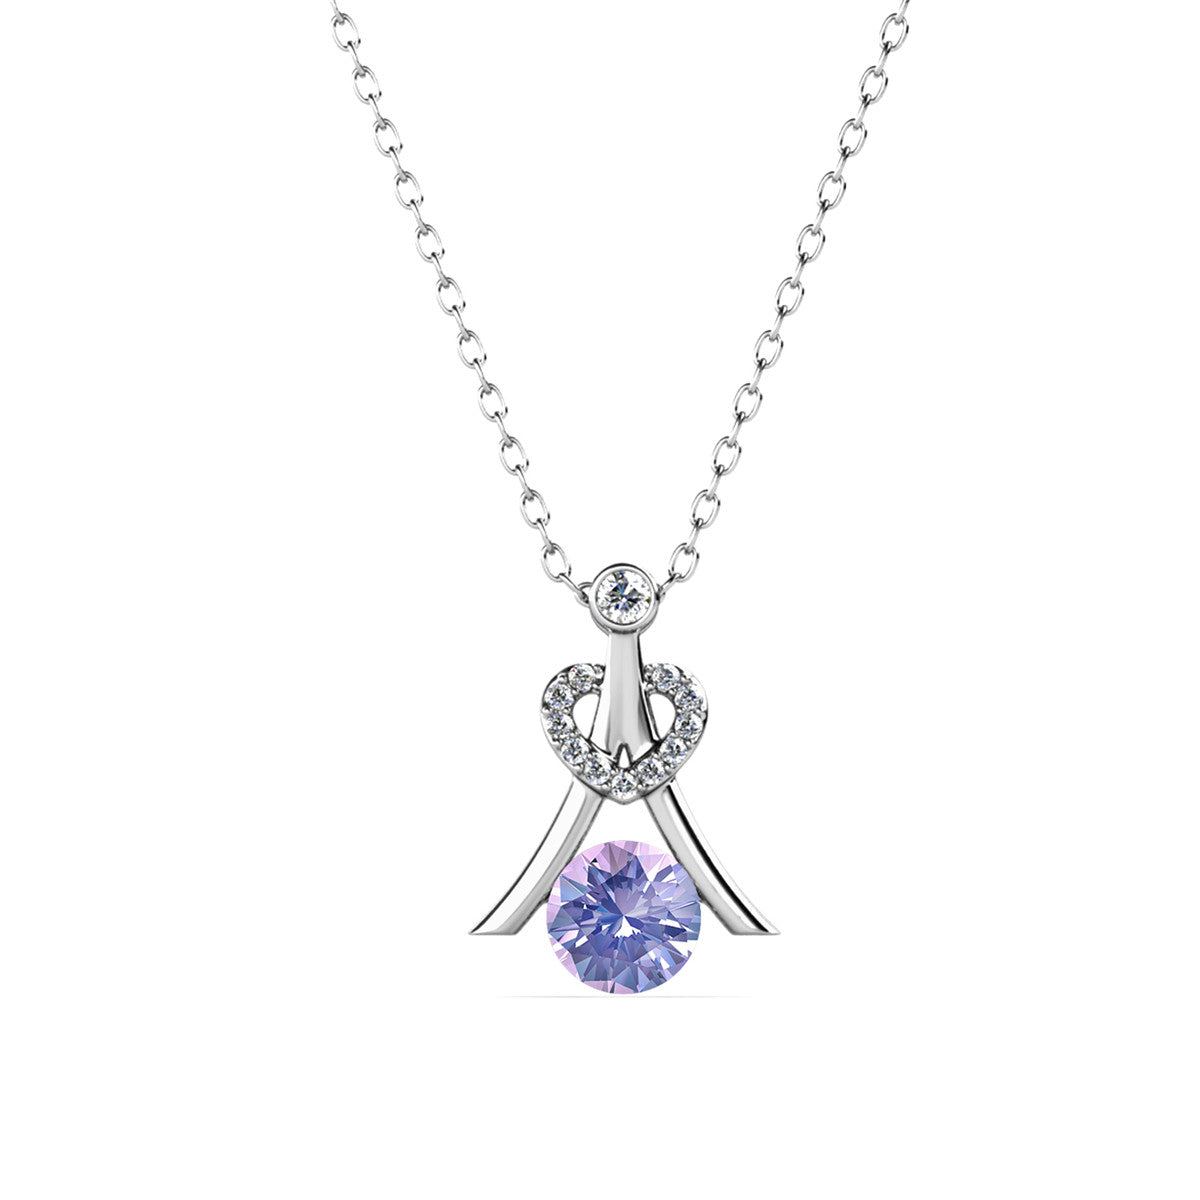 Serenity June Birthstone Alexandrite Necklace, 18k White Gold Plated Silver Necklace with Round Cut Crystals